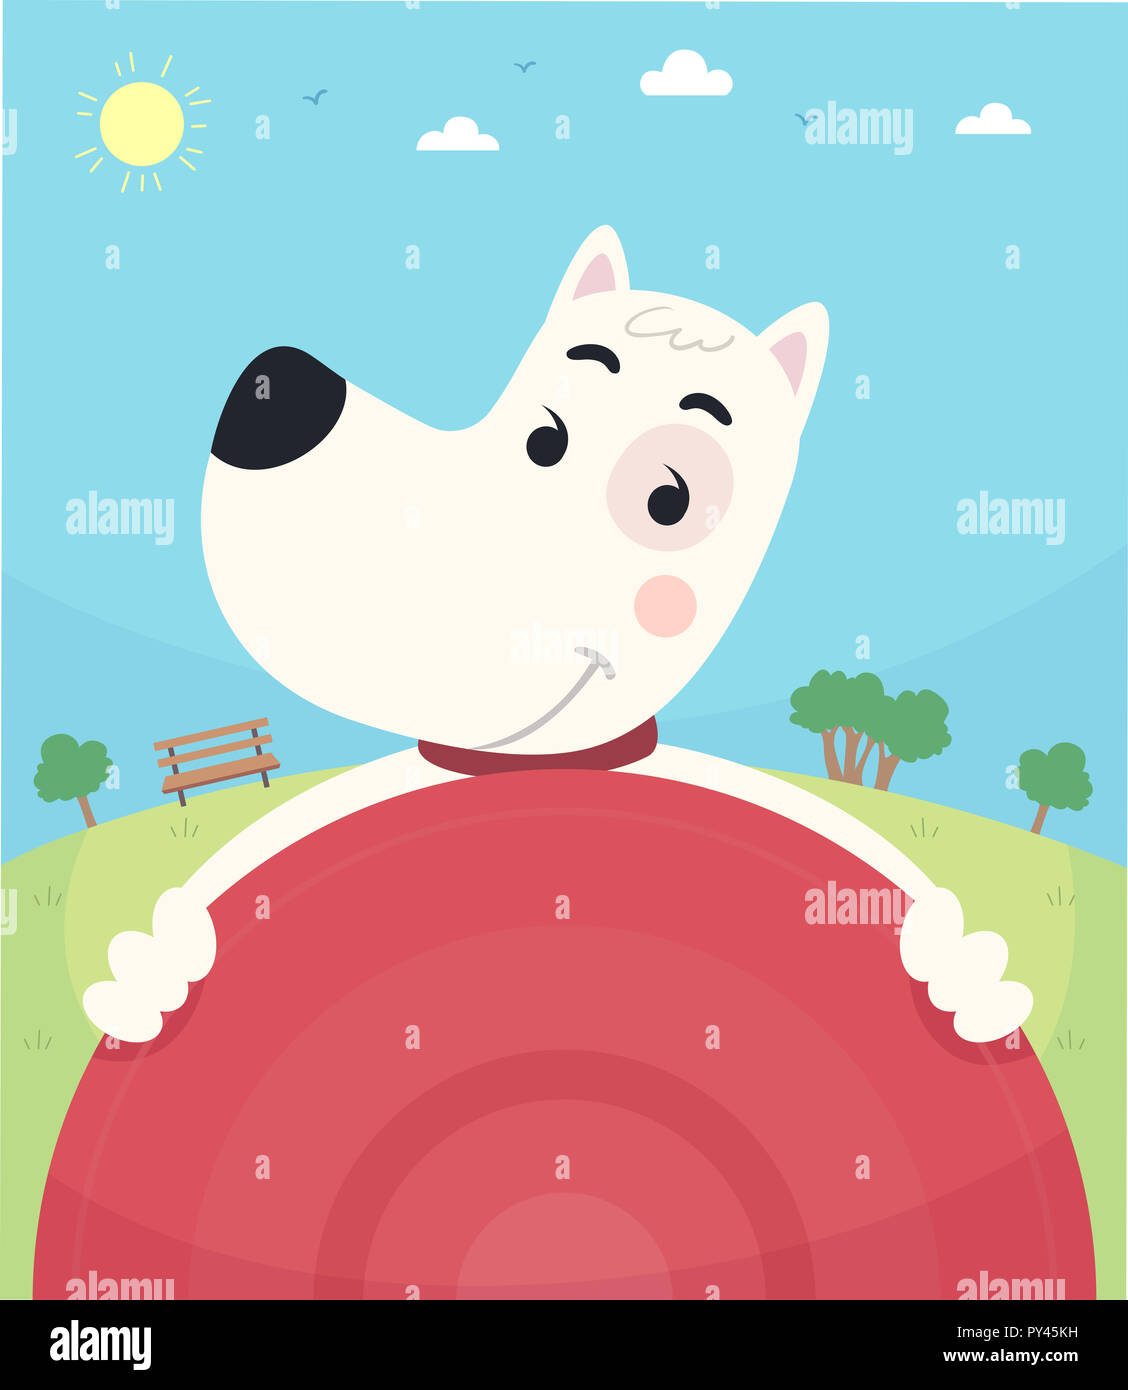 Illustration of a Dog in the Park Holding a Frisbee Inviting to Play Stock Photo